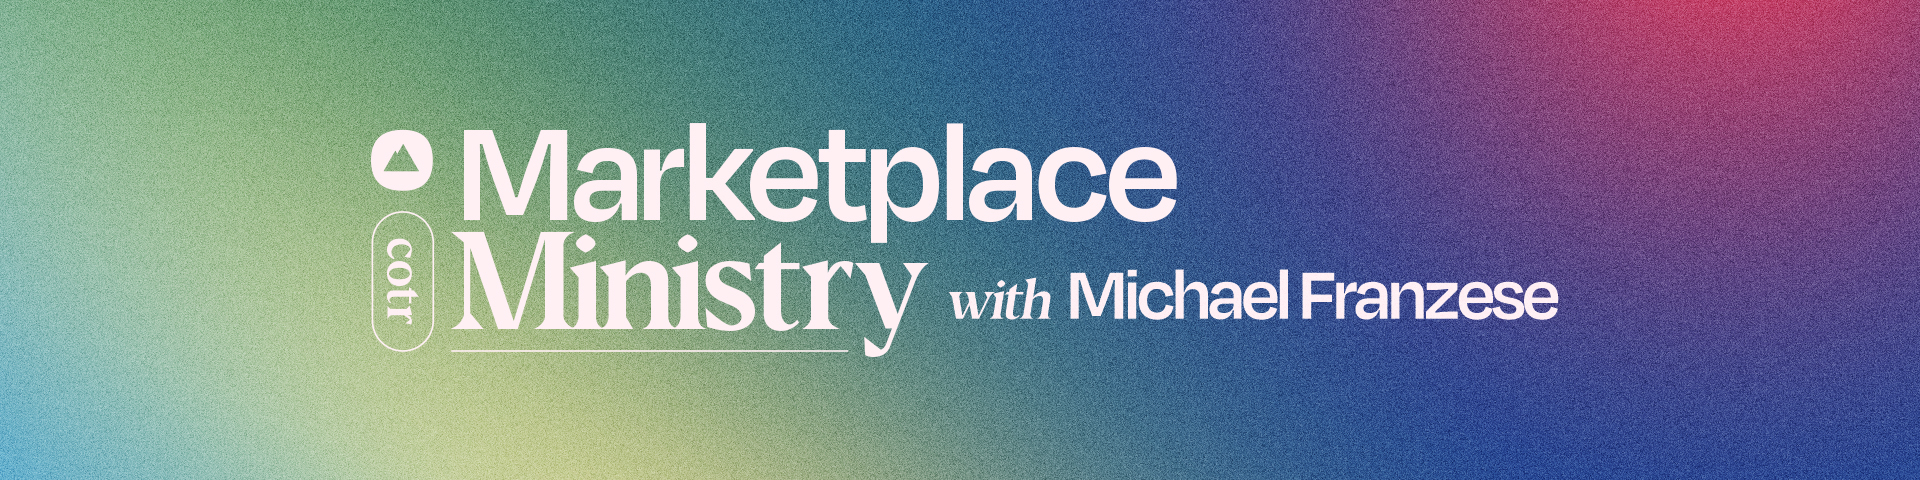 Marketplace_Ministry_Event_Banner_Michael_Franzese.jpg